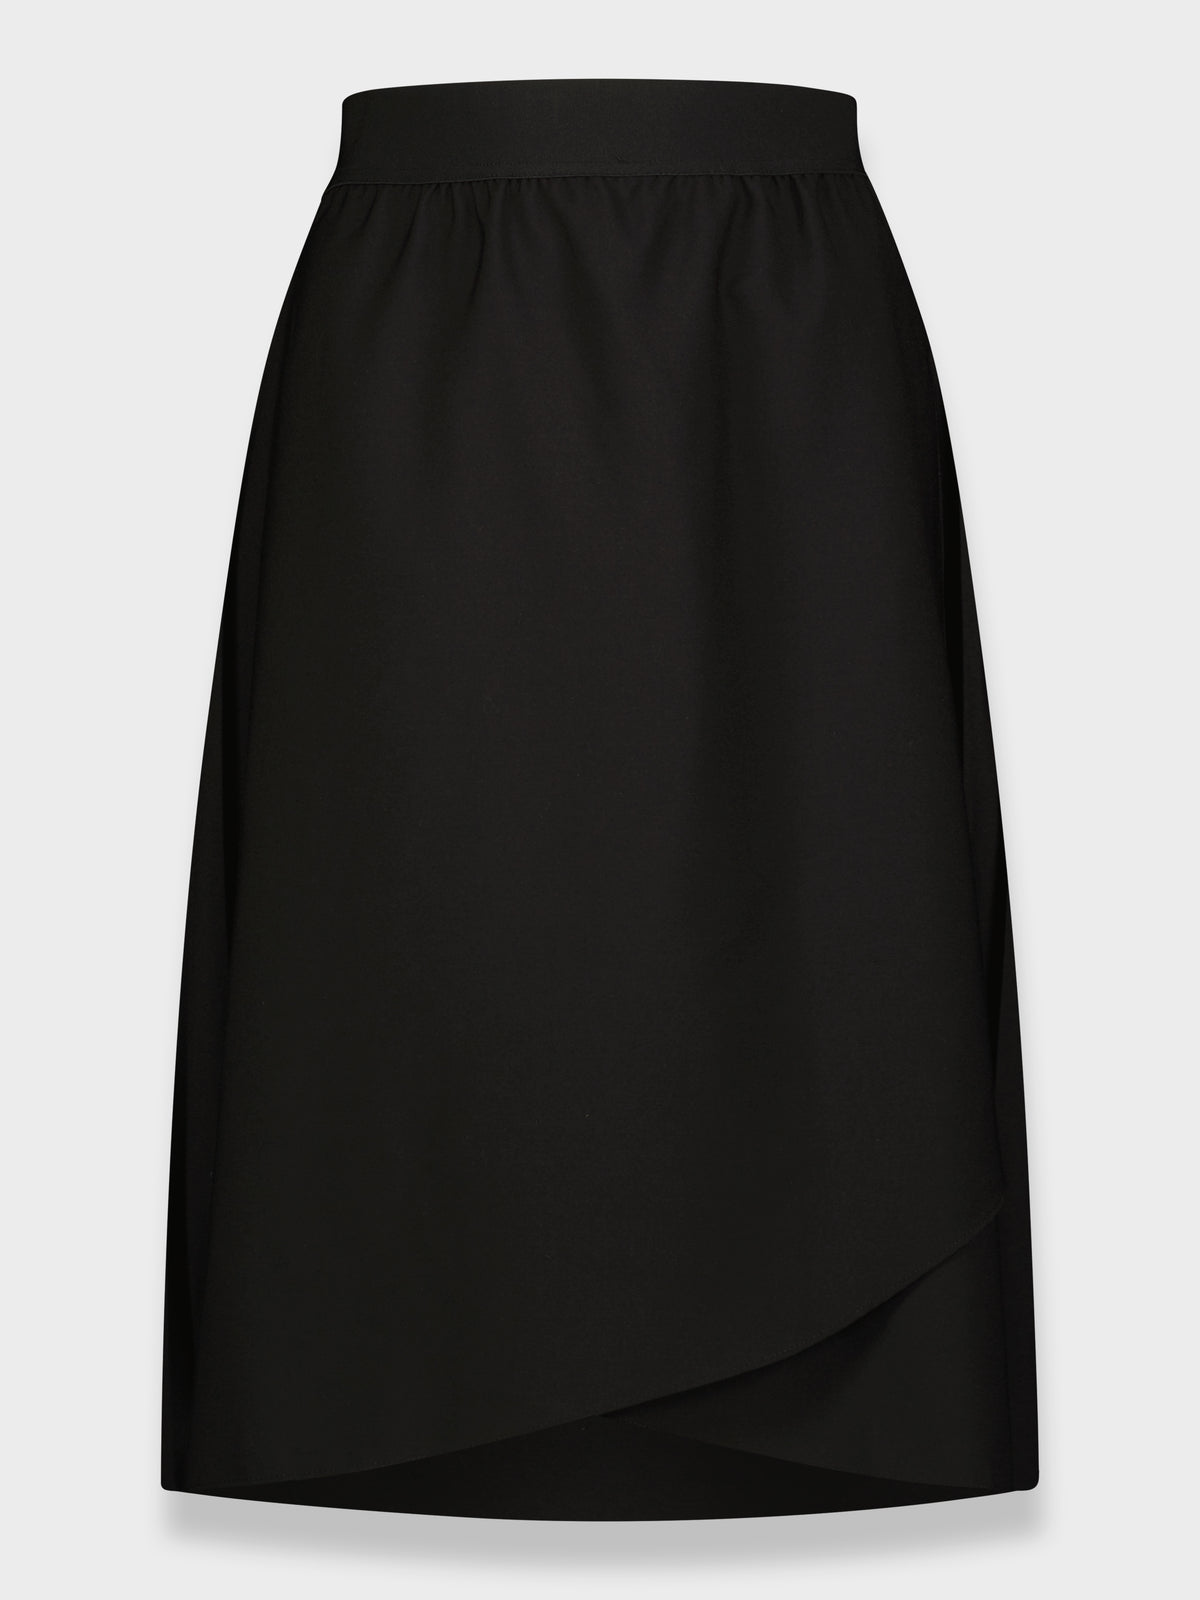 FLAT FRONT PLEATED SKIRT 35"-BLACK